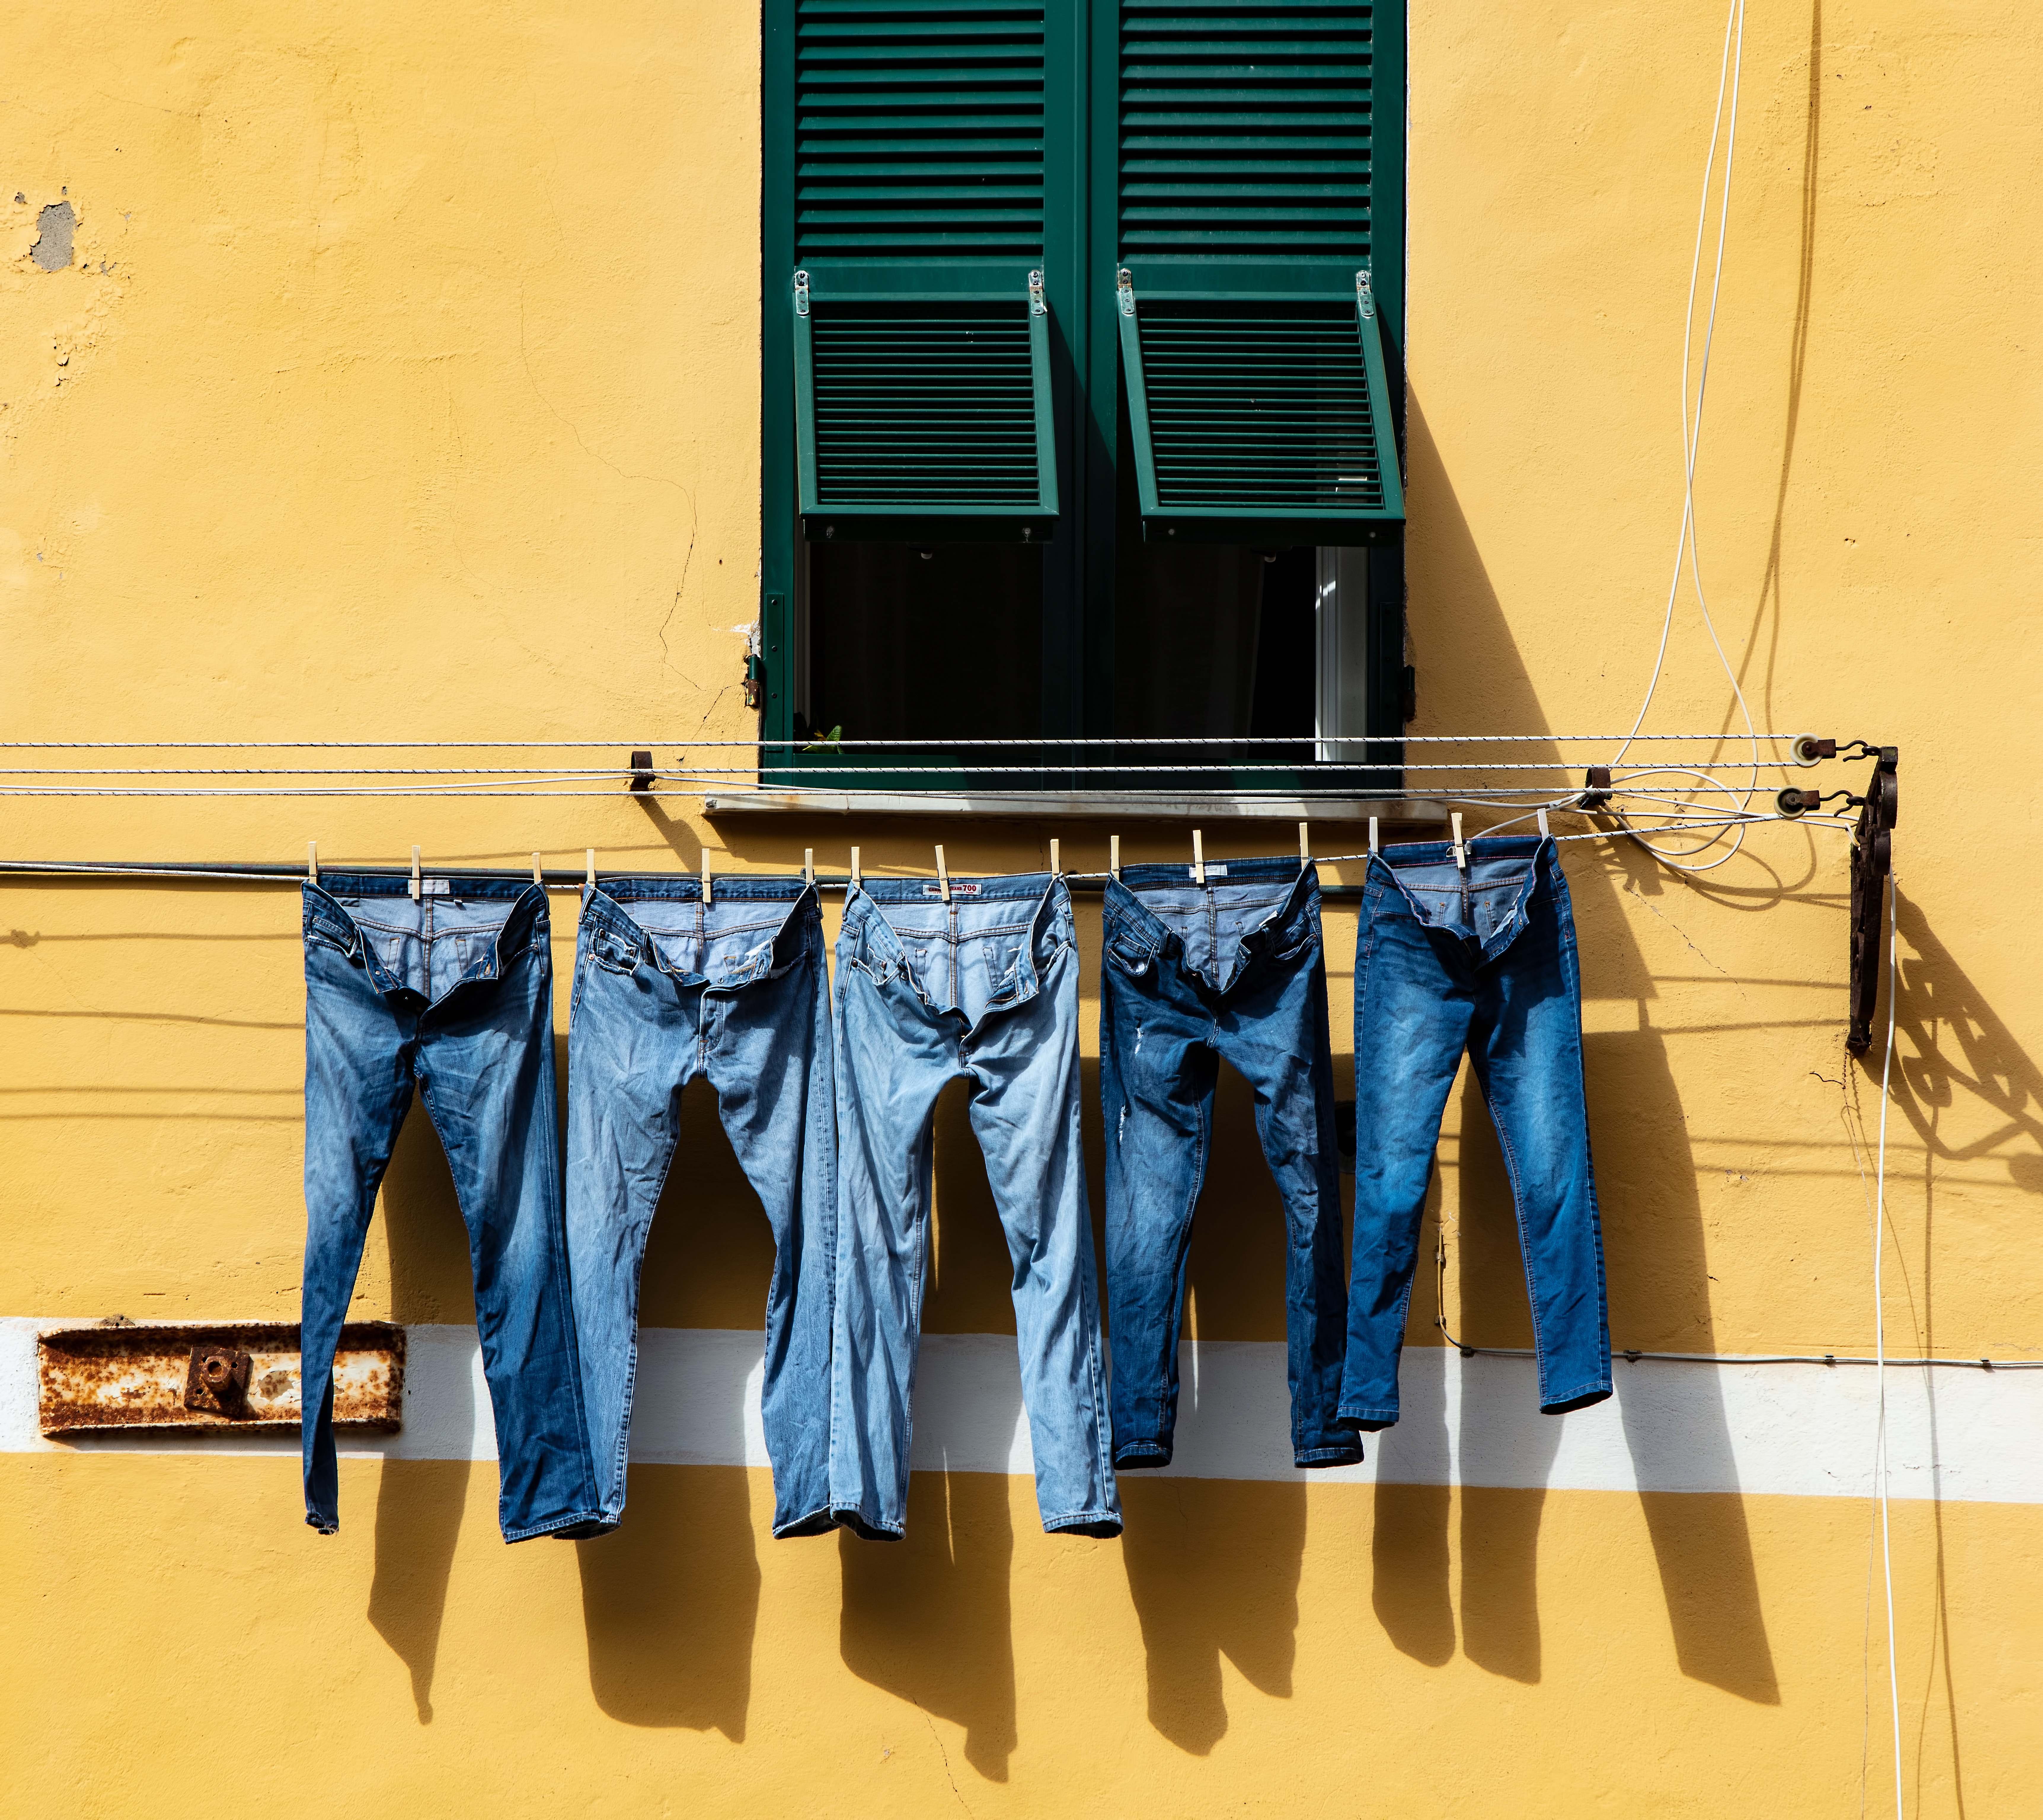 Jeans hanging to dry outside a window.